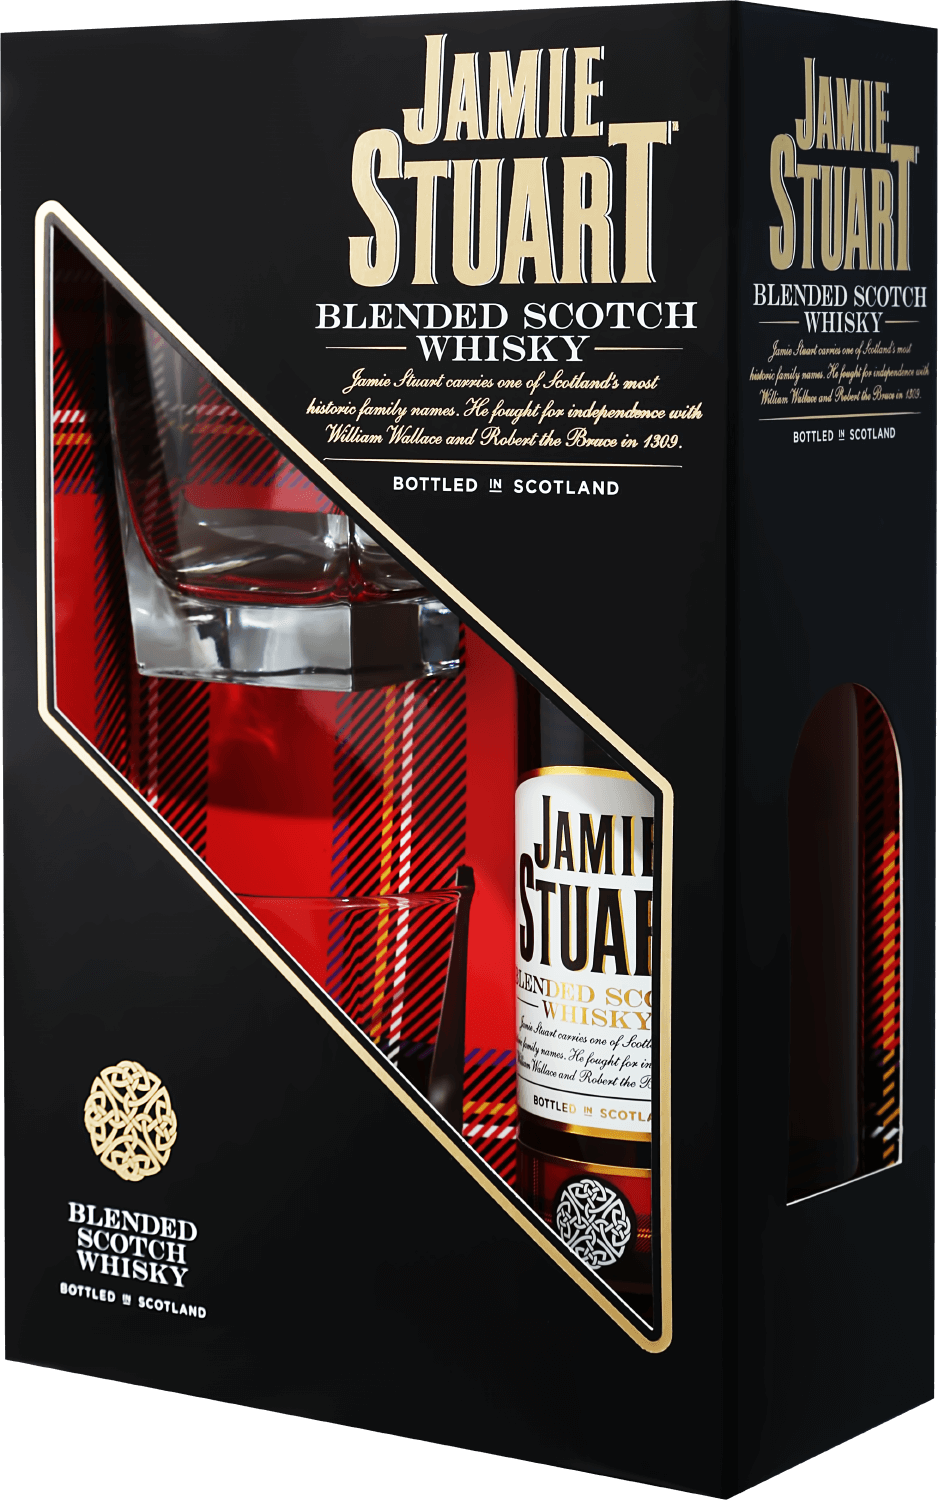 Jamie Stuart Blended Scotch Whisky 3 y.o. (gift box with 2 glasses)